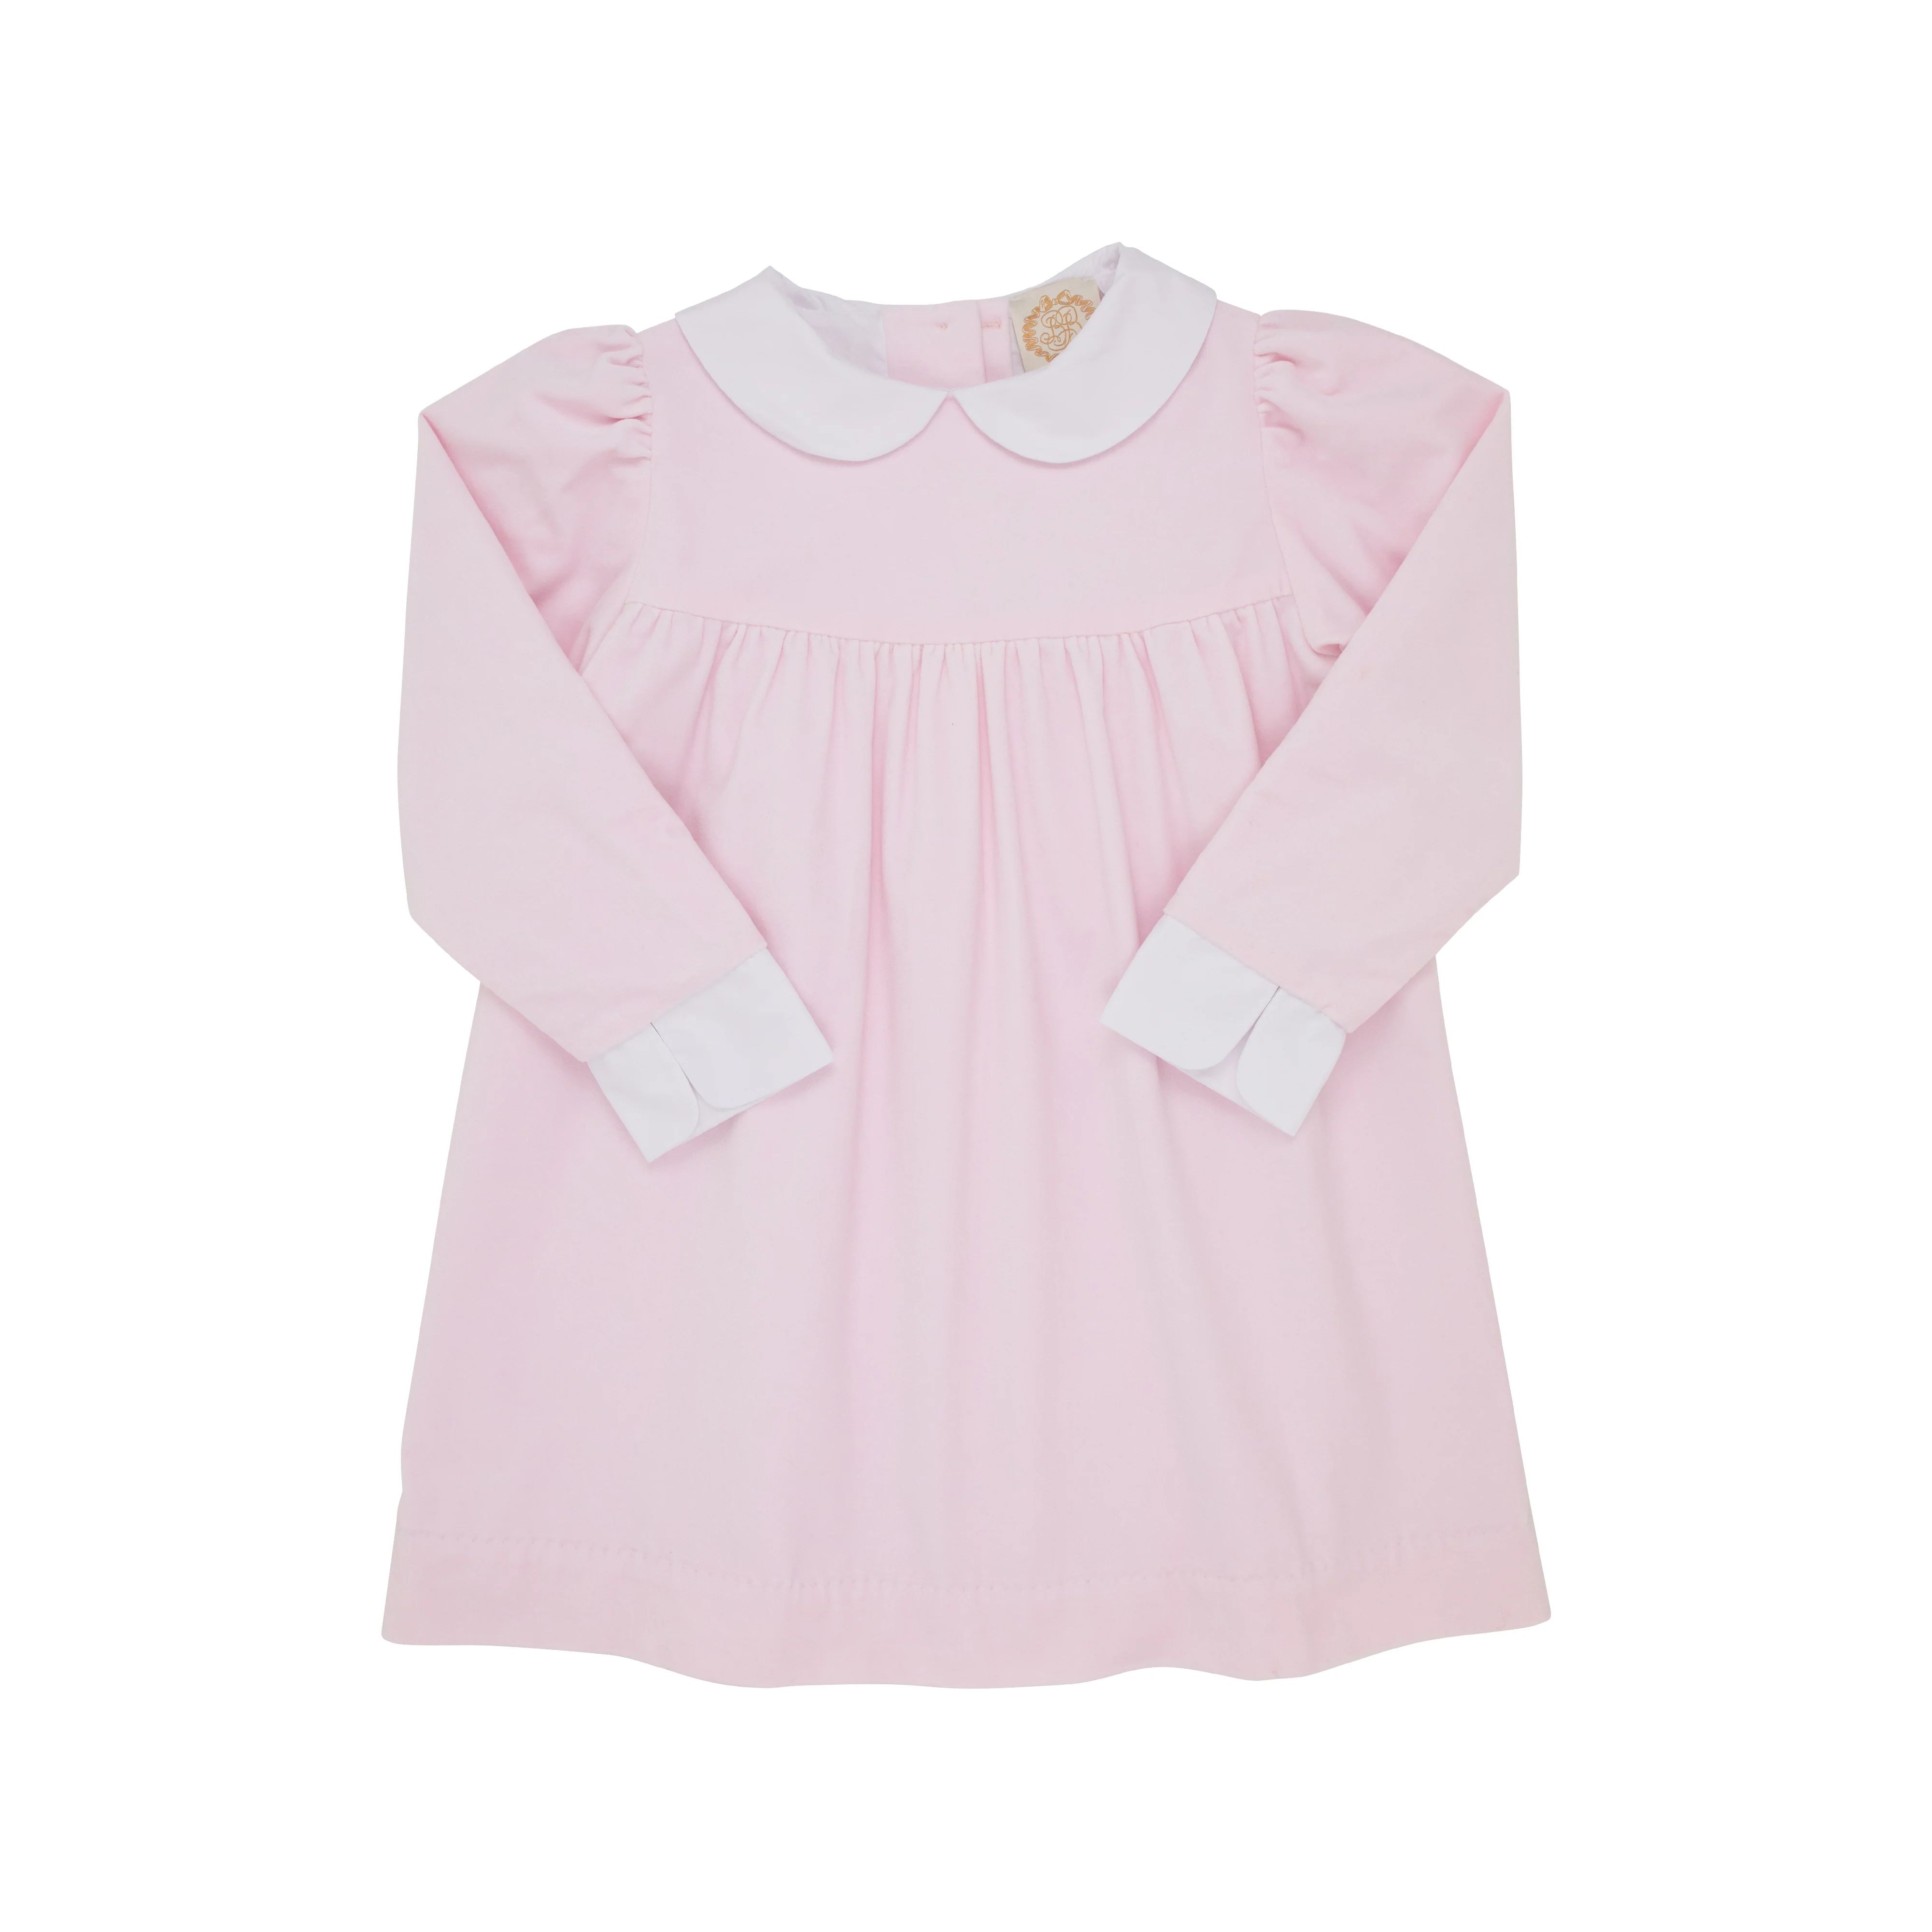 Patsy's Dinner Party Dress (Velveteen) - Palm Beach Pink with Worth Avenue White Collar | The Beaufort Bonnet Company